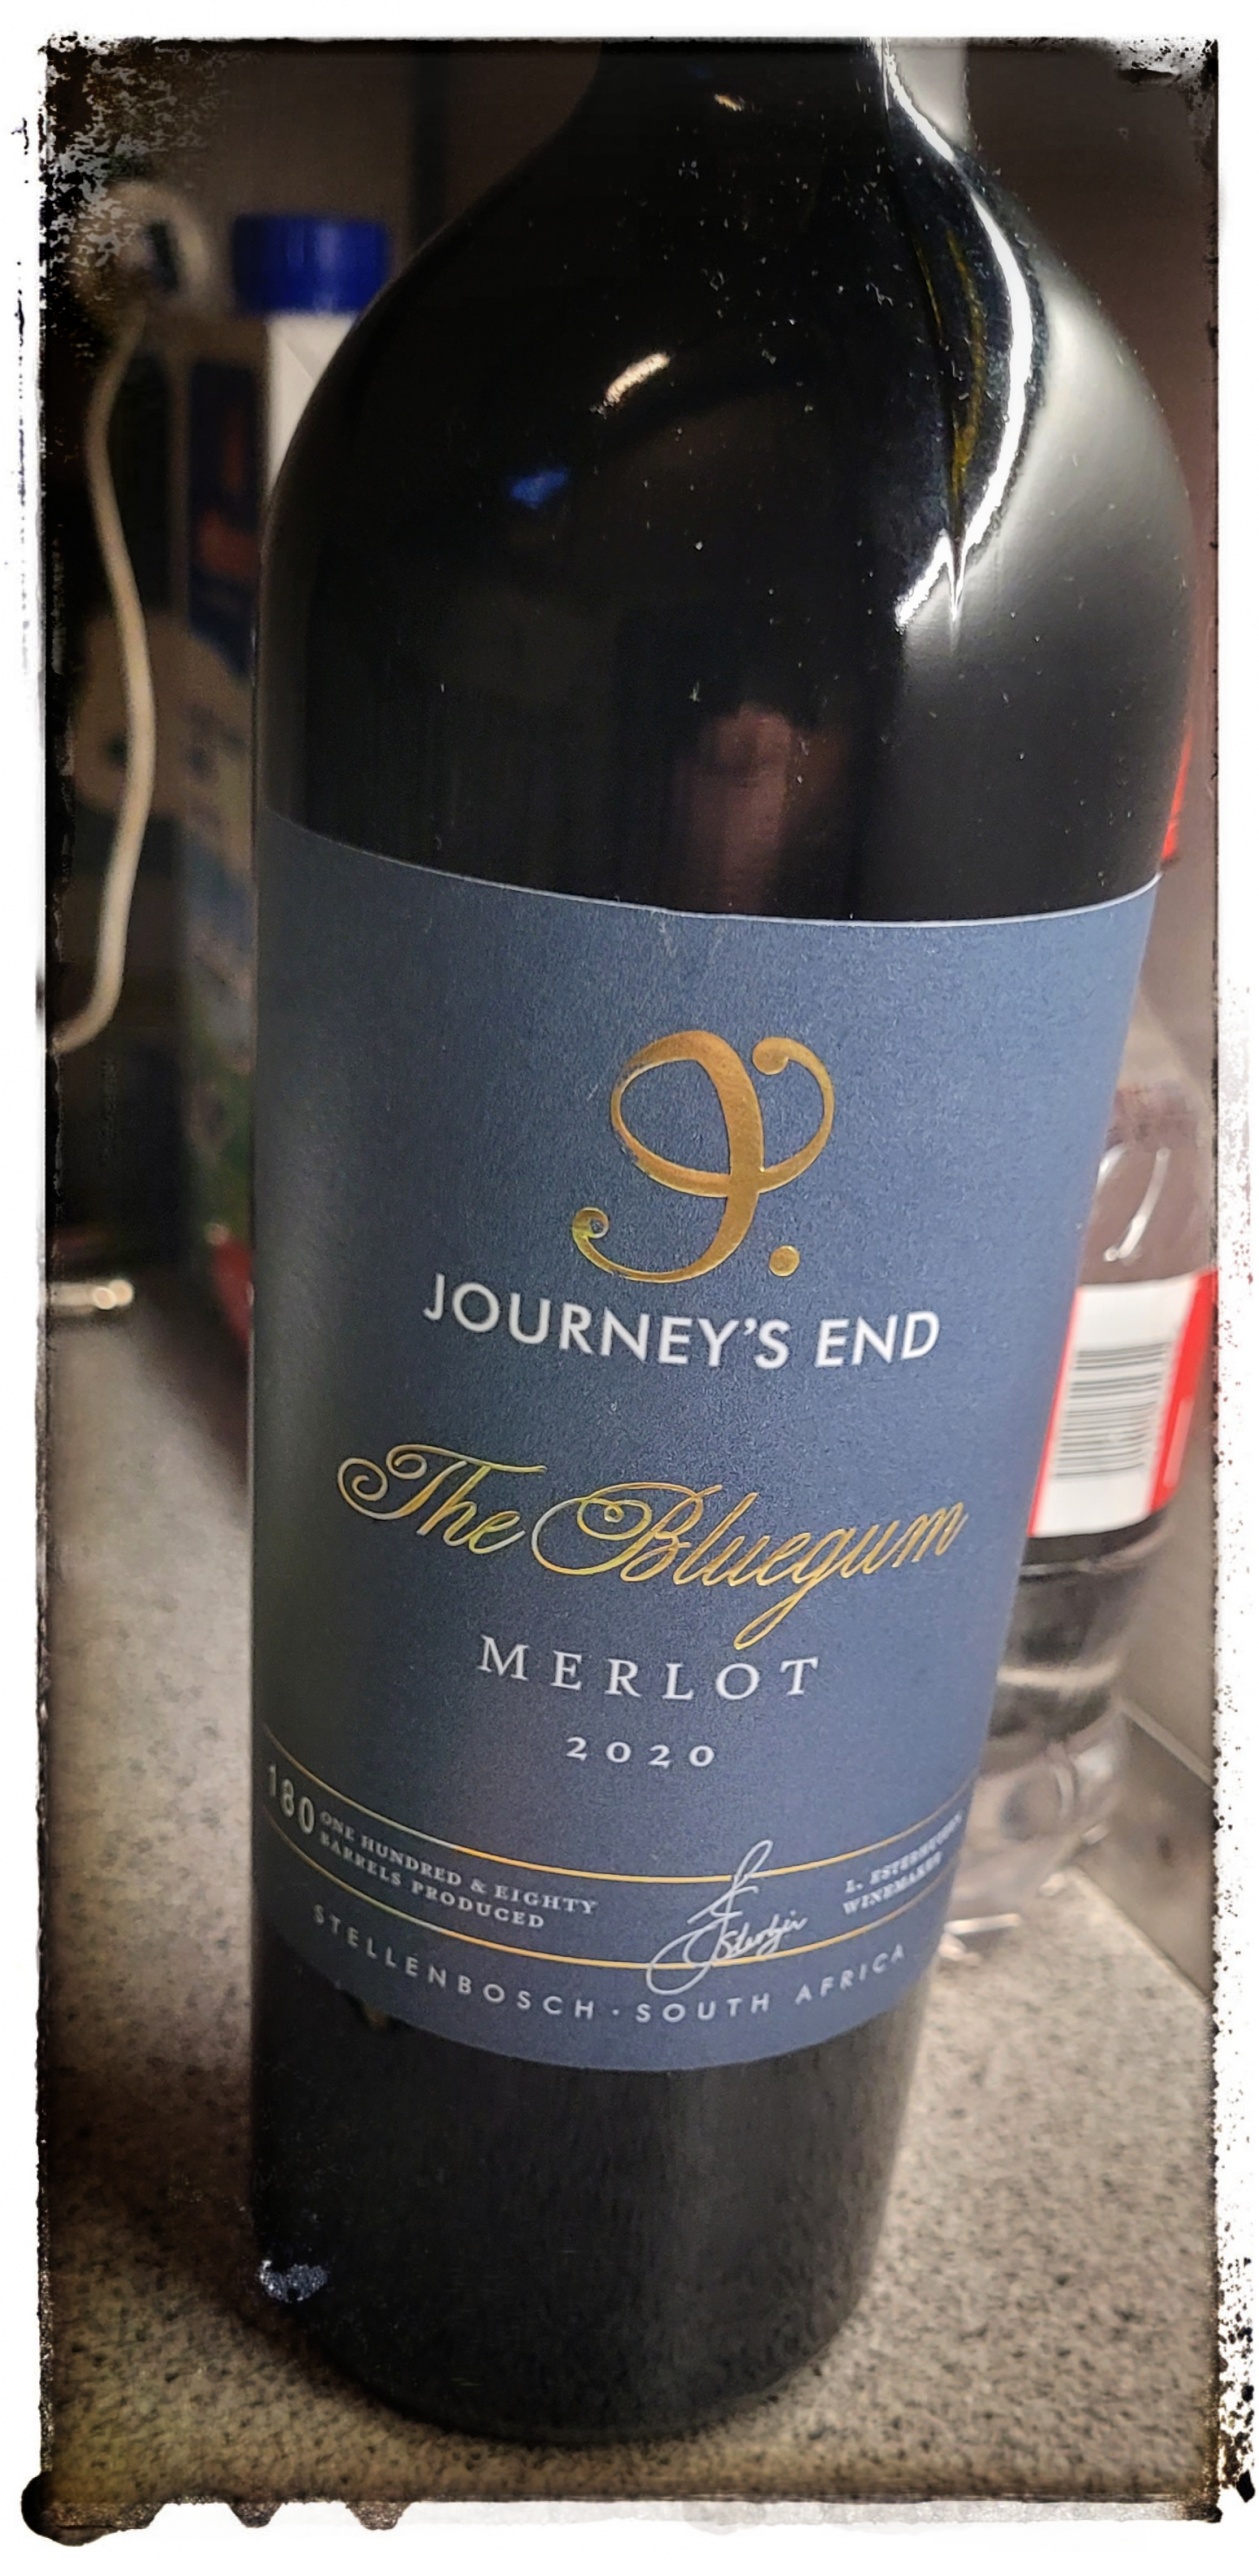 jpourneys end wine